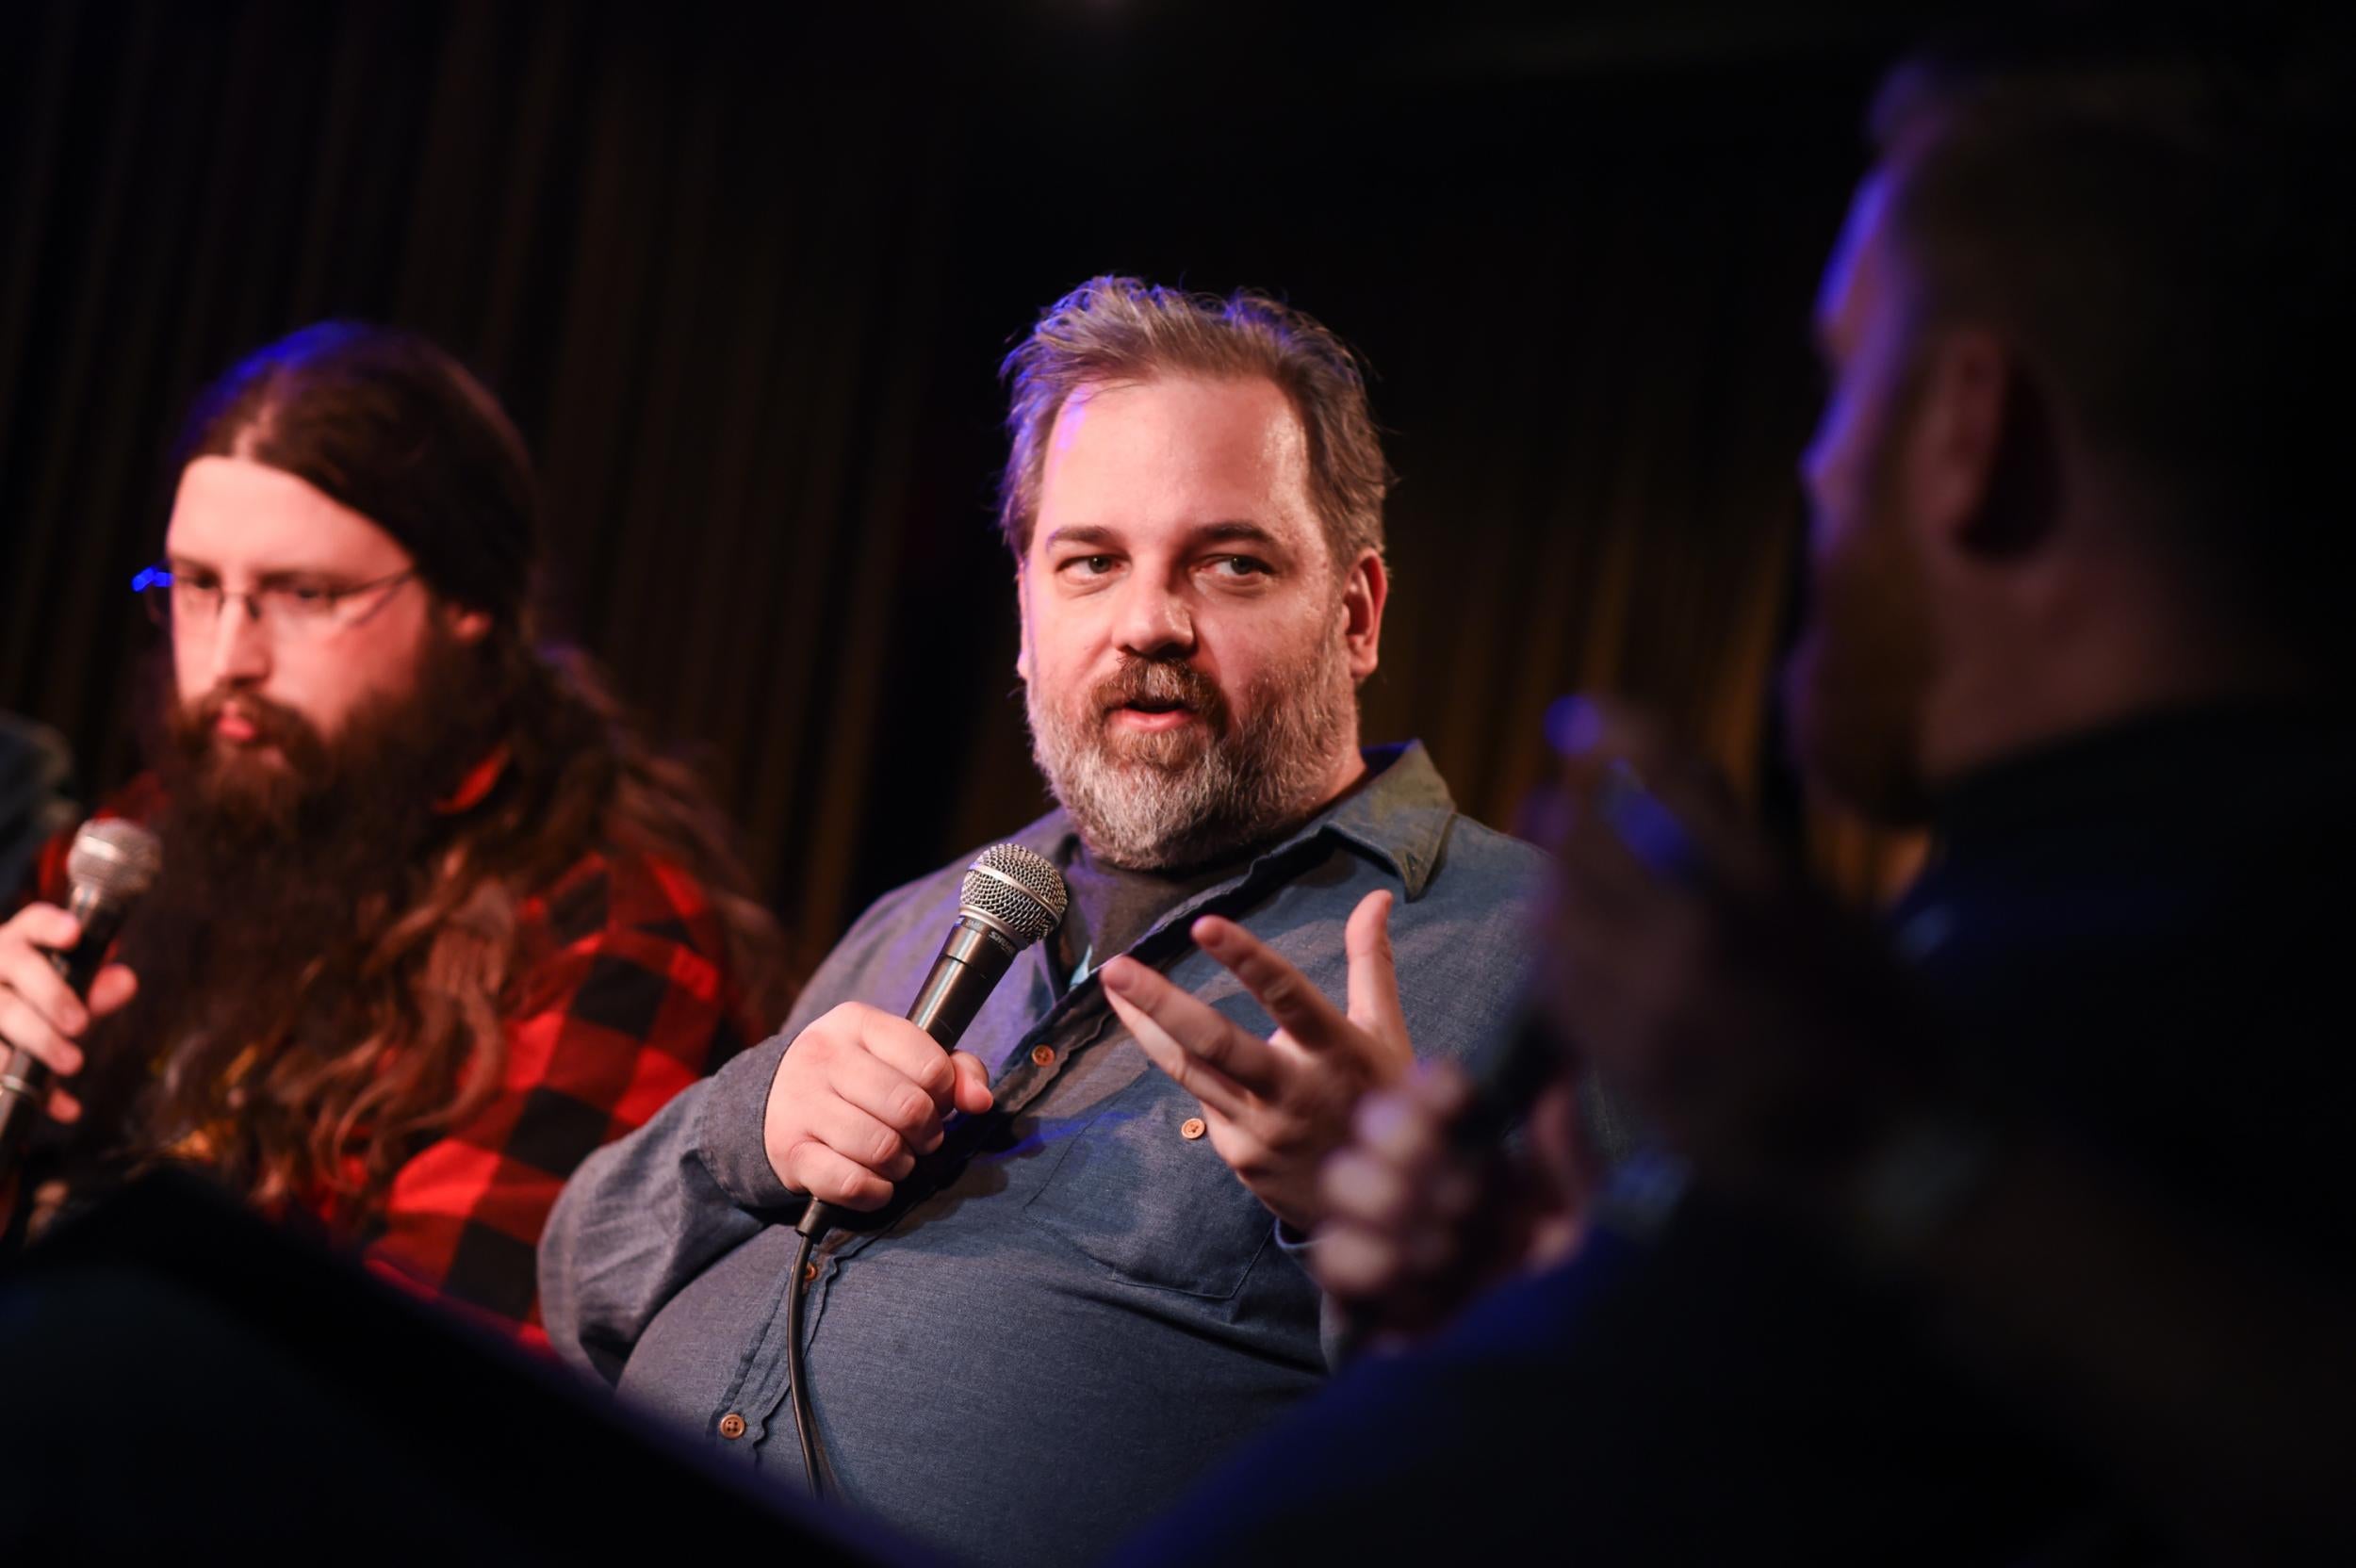 Dan Harmon has a history of workplace misconduct (Getty Images)